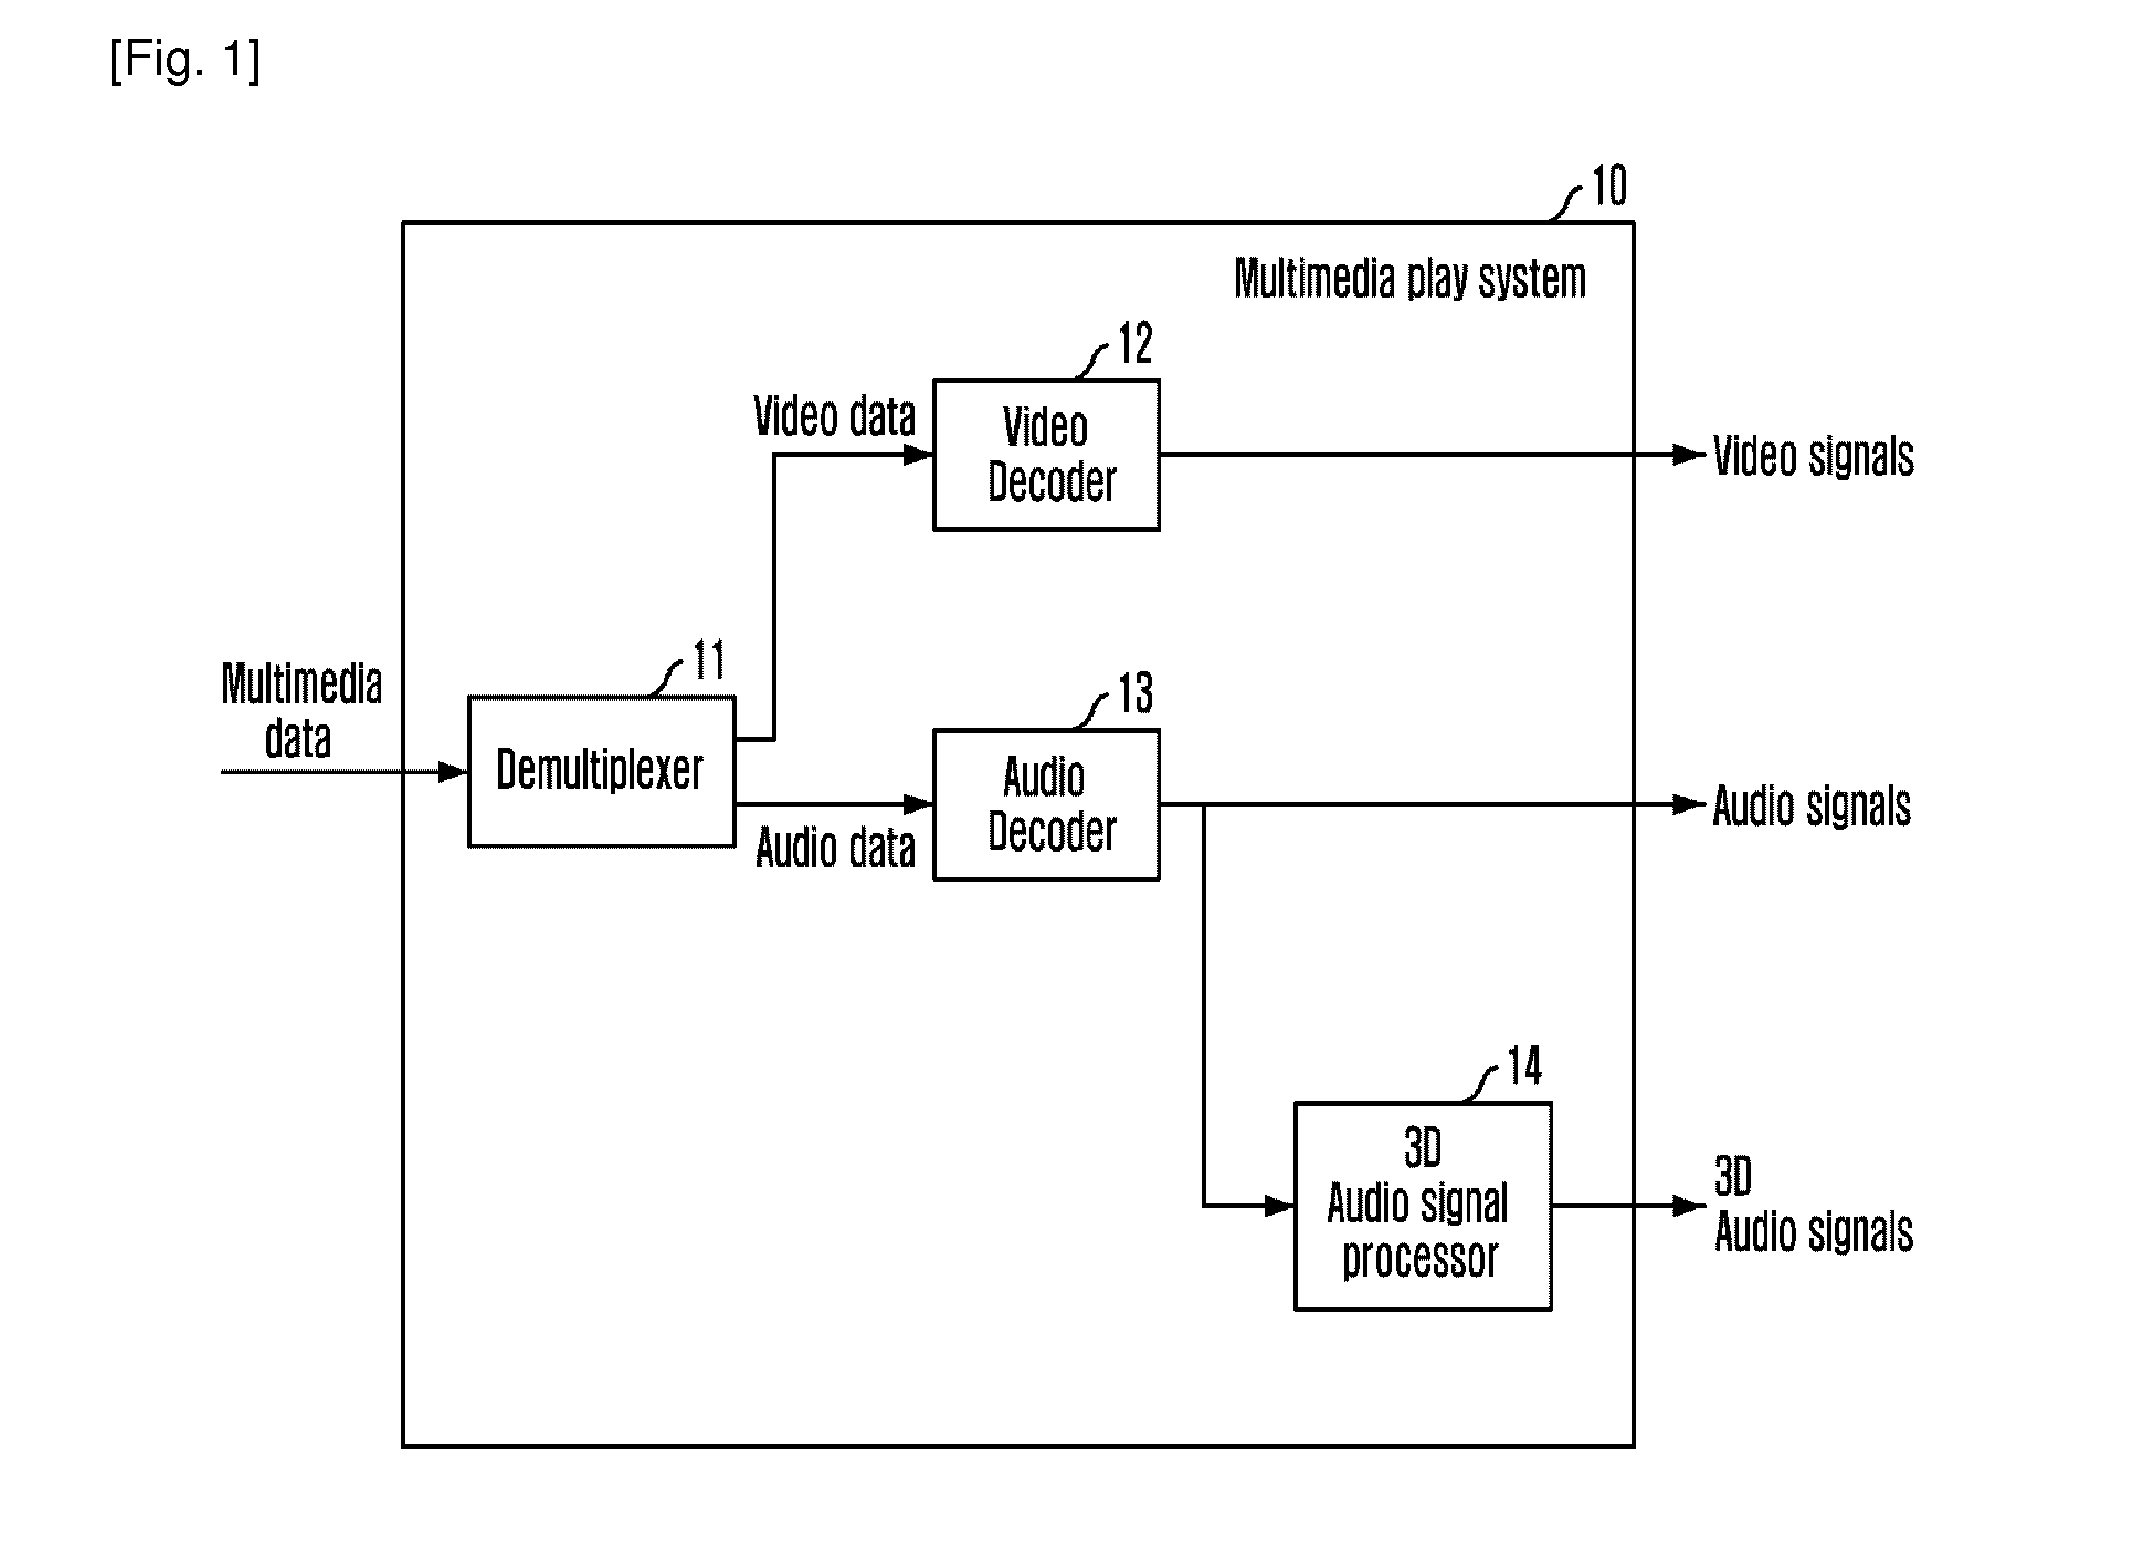 Apparatus and method for processing 3D audio signal based on hrtf, and highly realistic multimedia playing system using the same